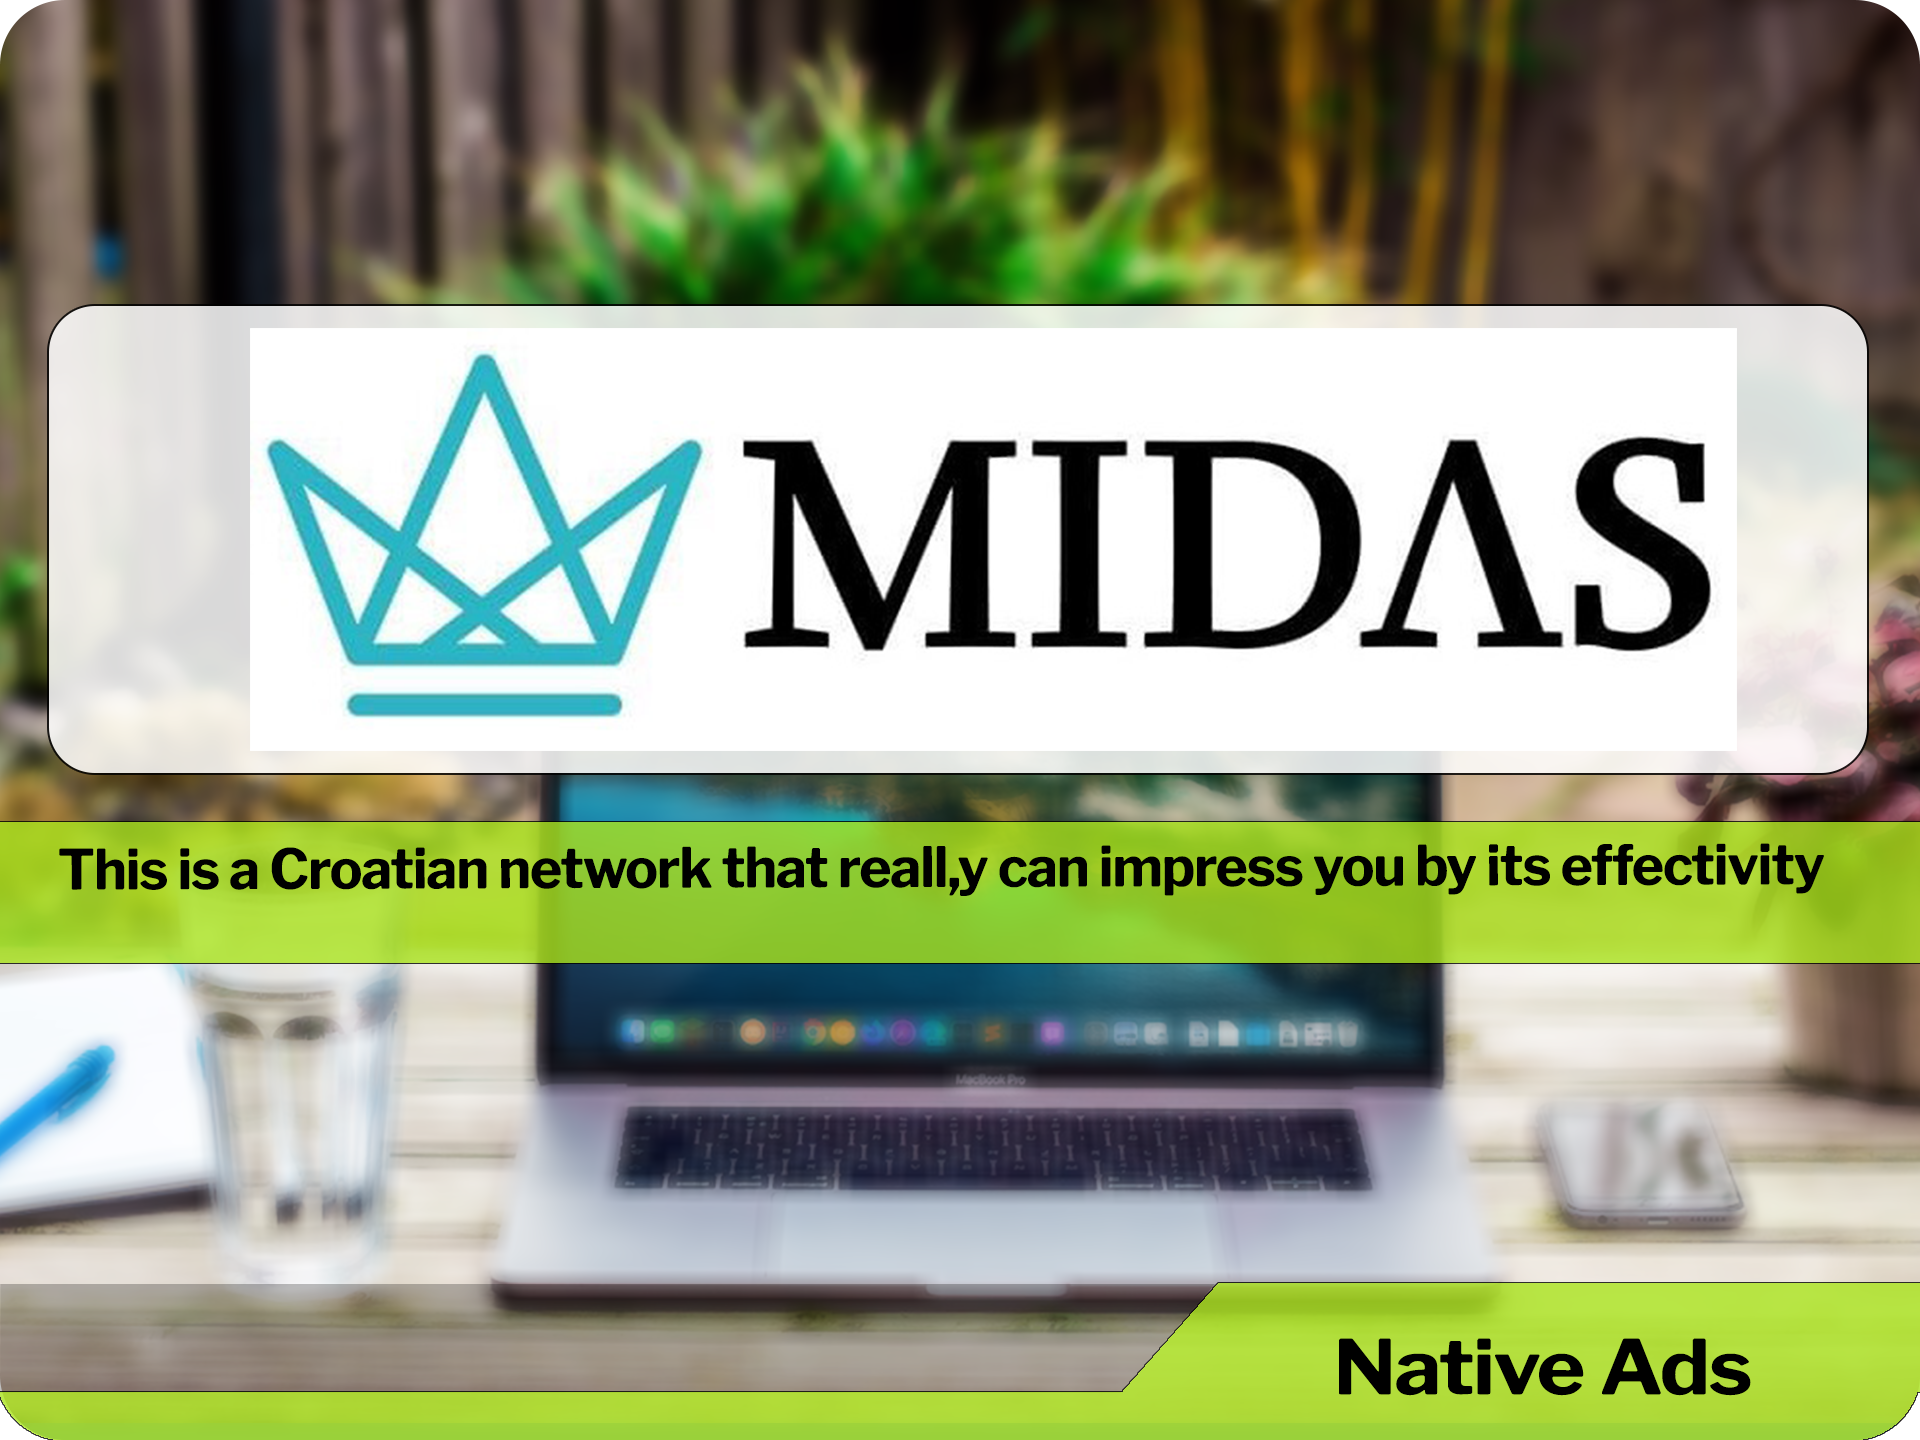 What makes Midas different?